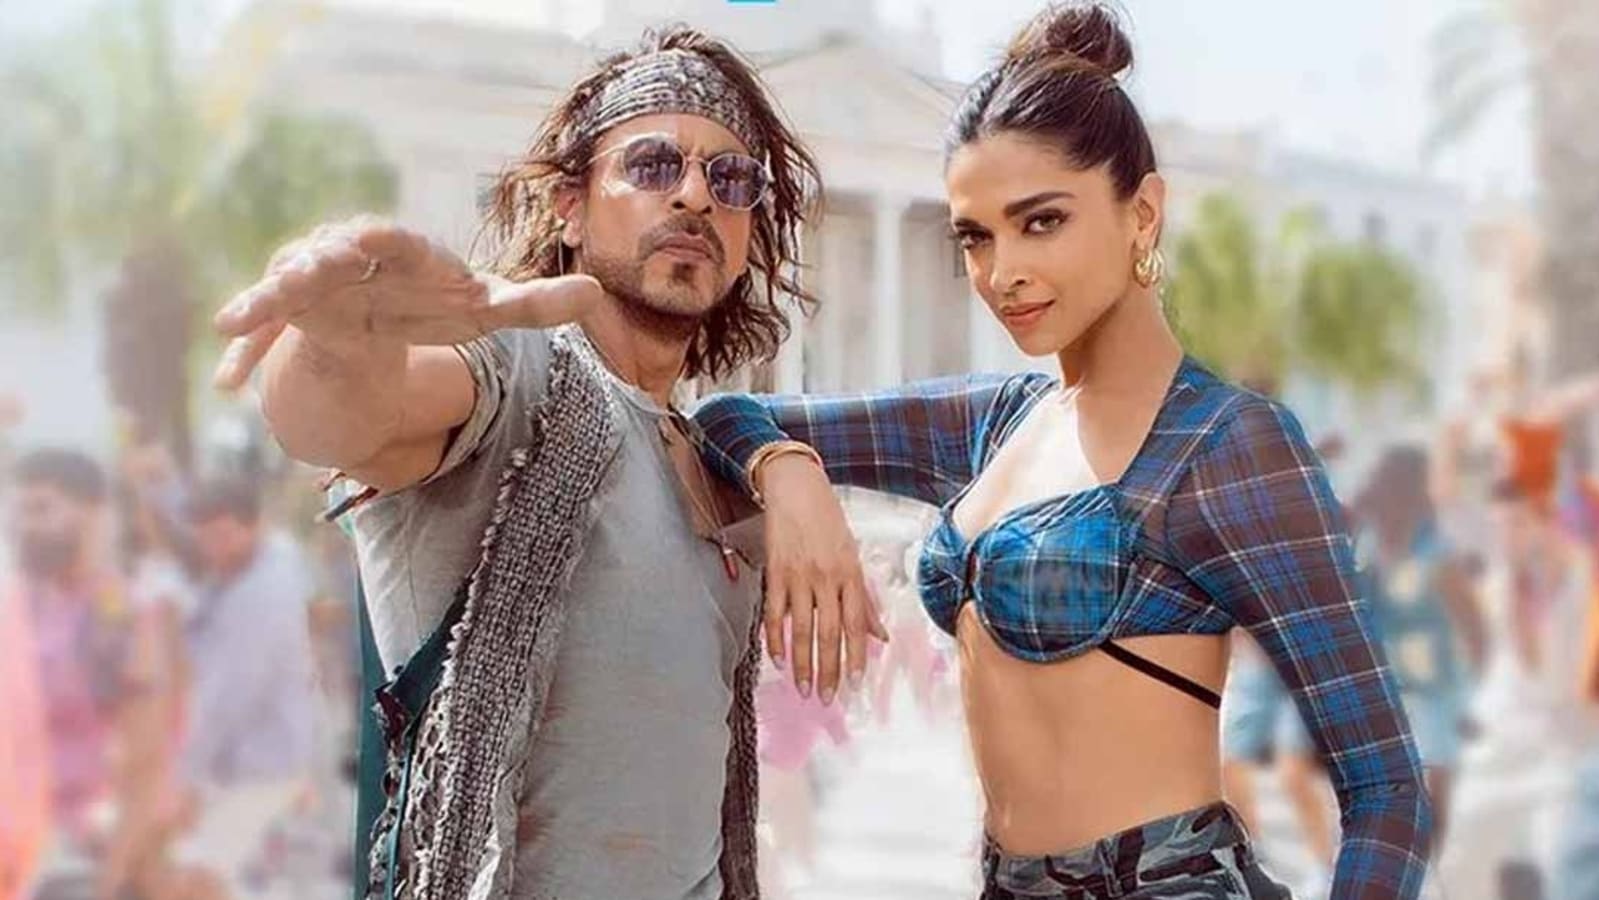 Shah Rukh Khan says Deepika Padukone has the sexiest fight scene in Pathaan Bollywood image